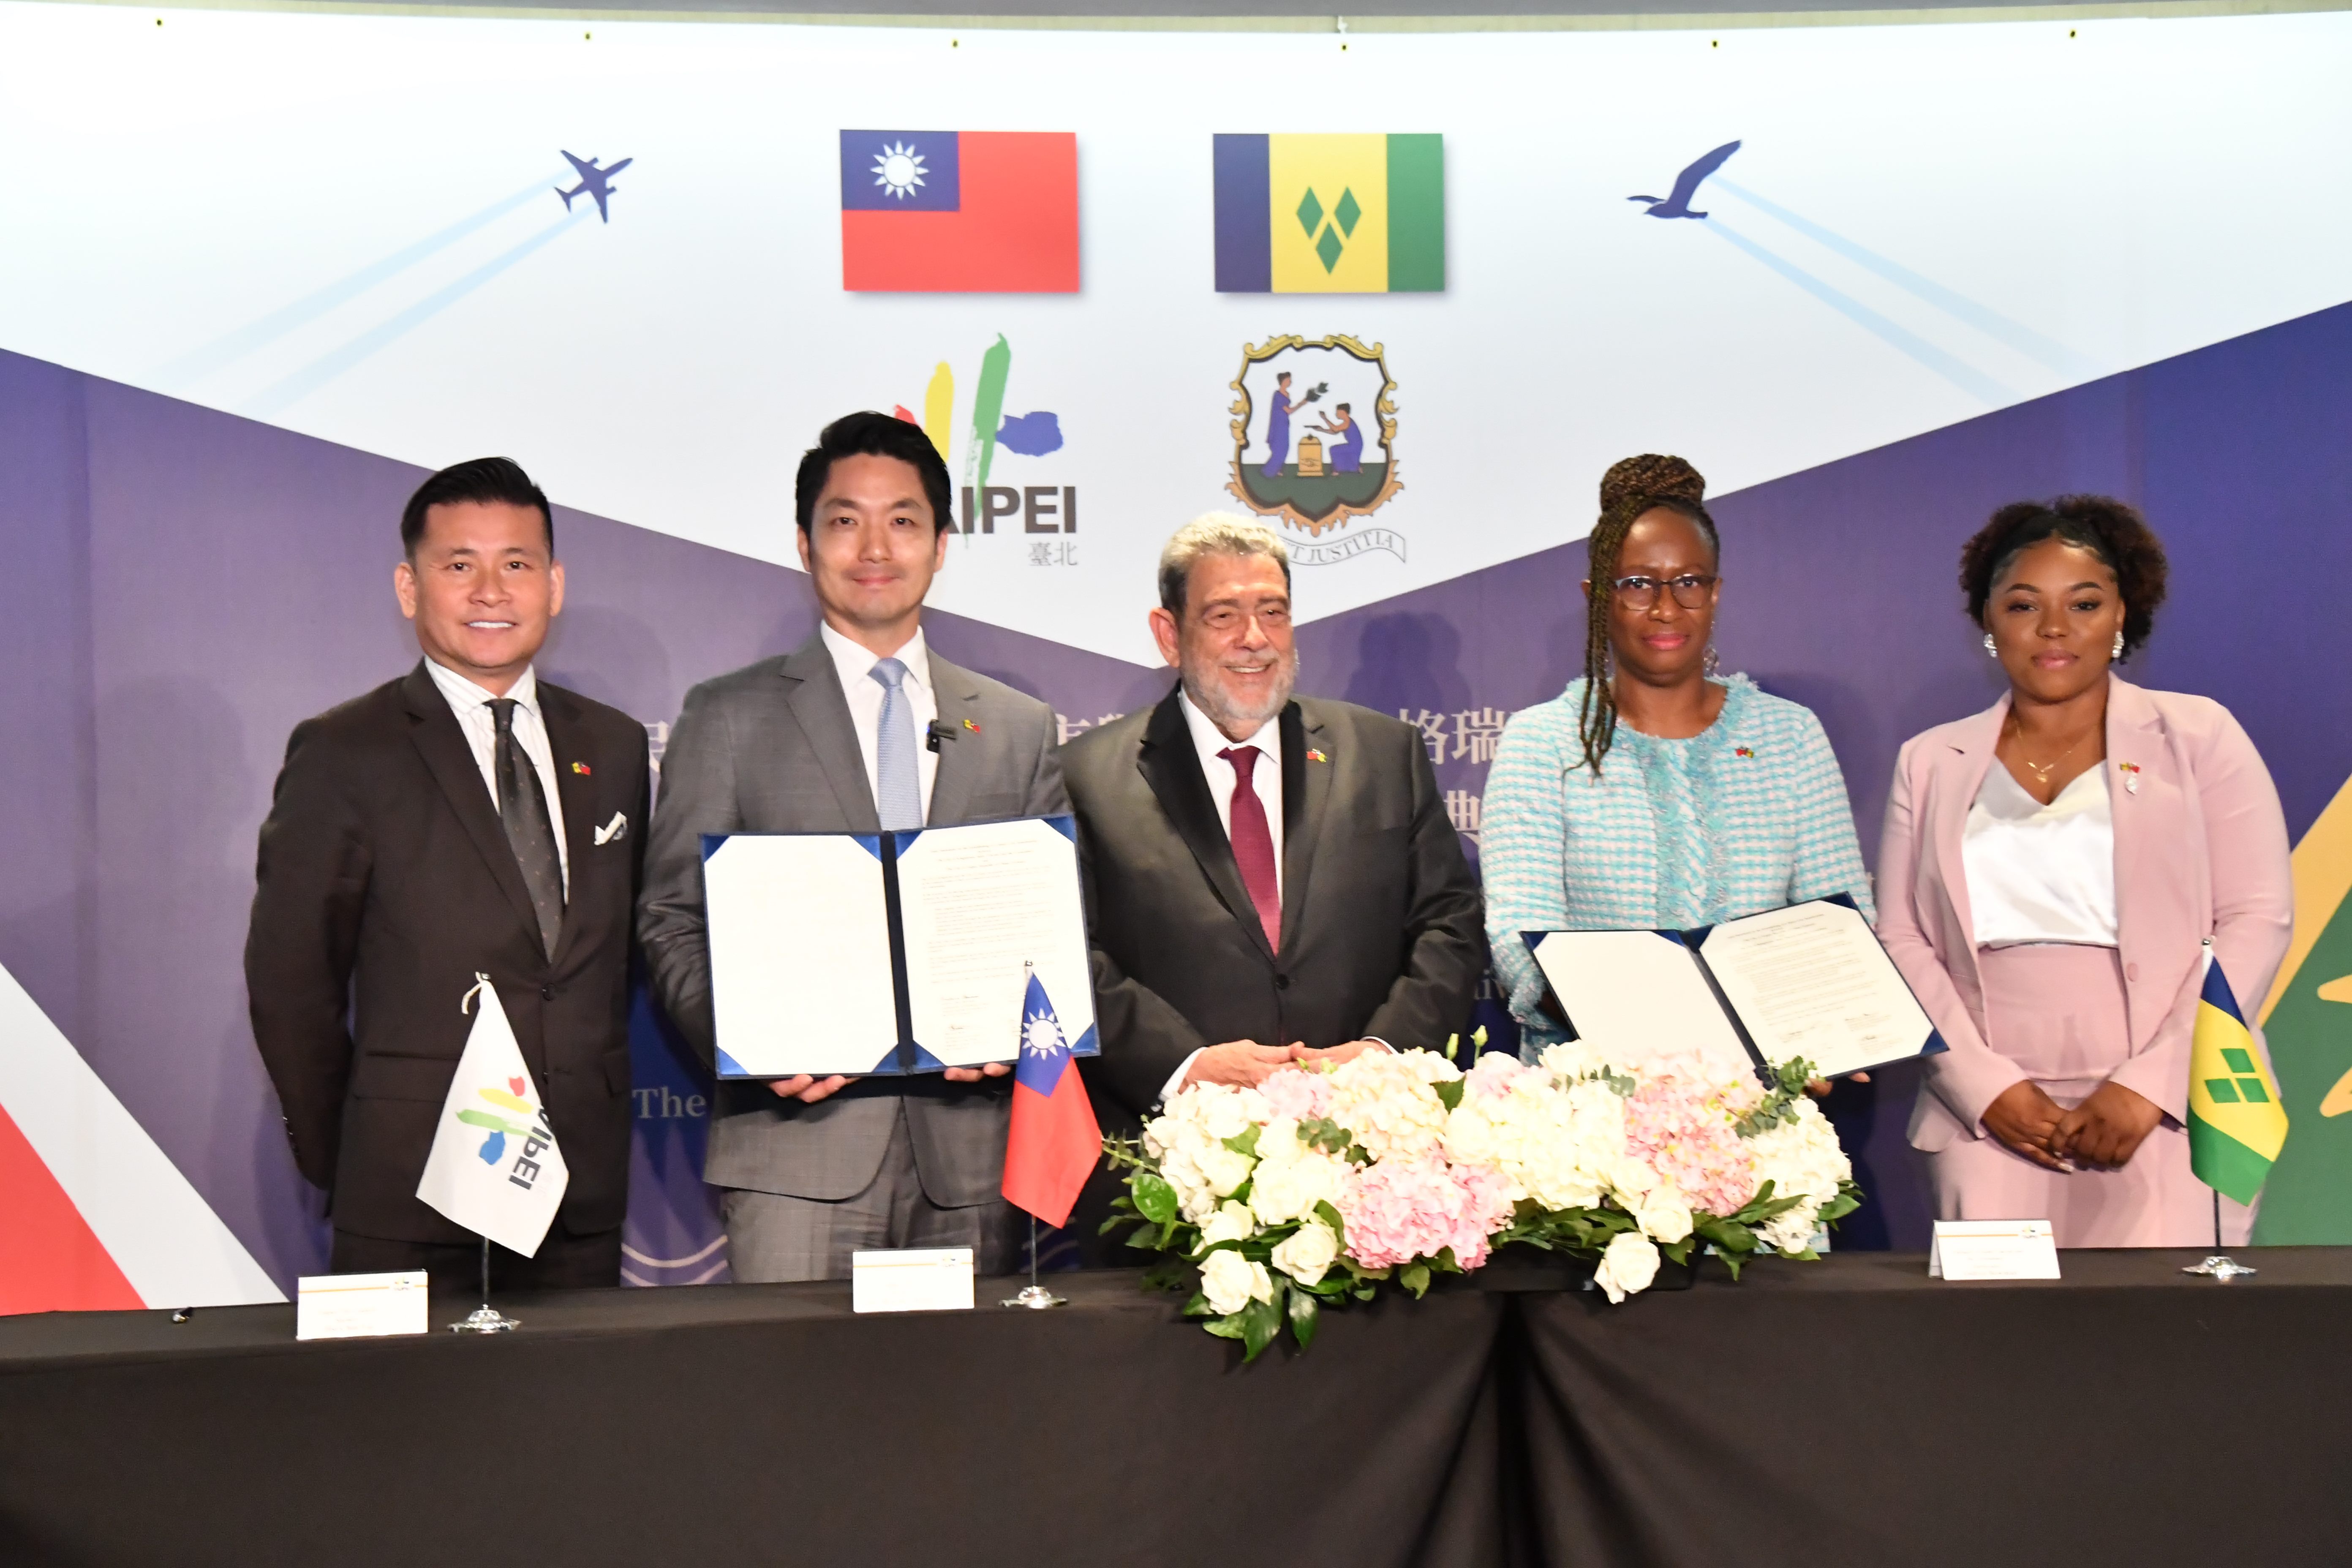 0521-Sister City Signing Ceremony between Taipei and Kingstown, the Capital of Saint Vincent and the Grenadines